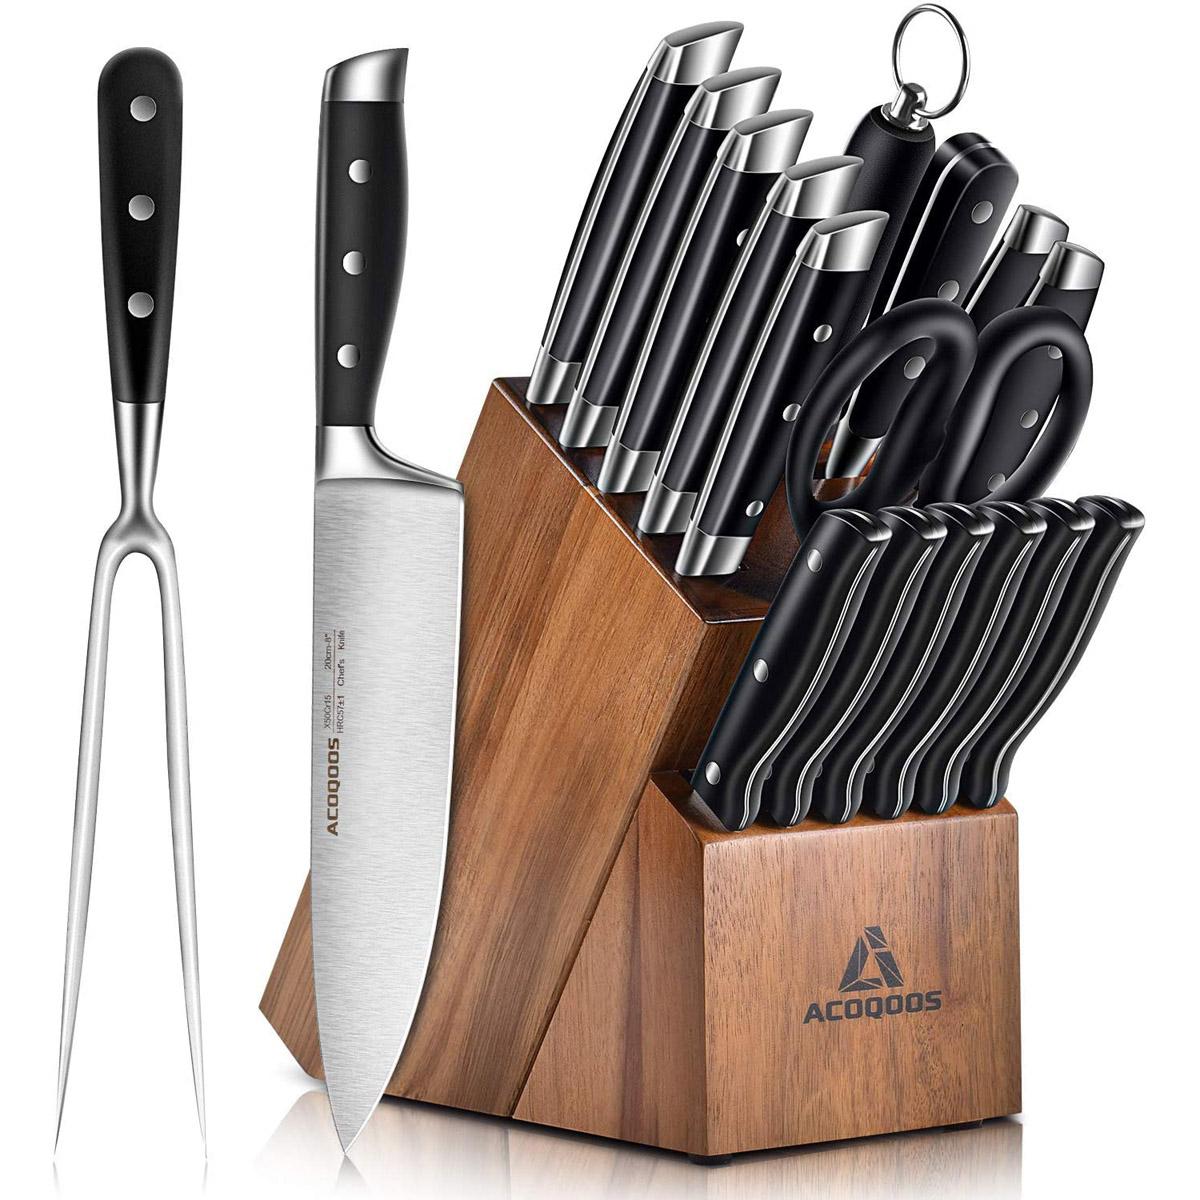 Acoqoos 17-Piece Knife Block Set for $41.32 Shipped